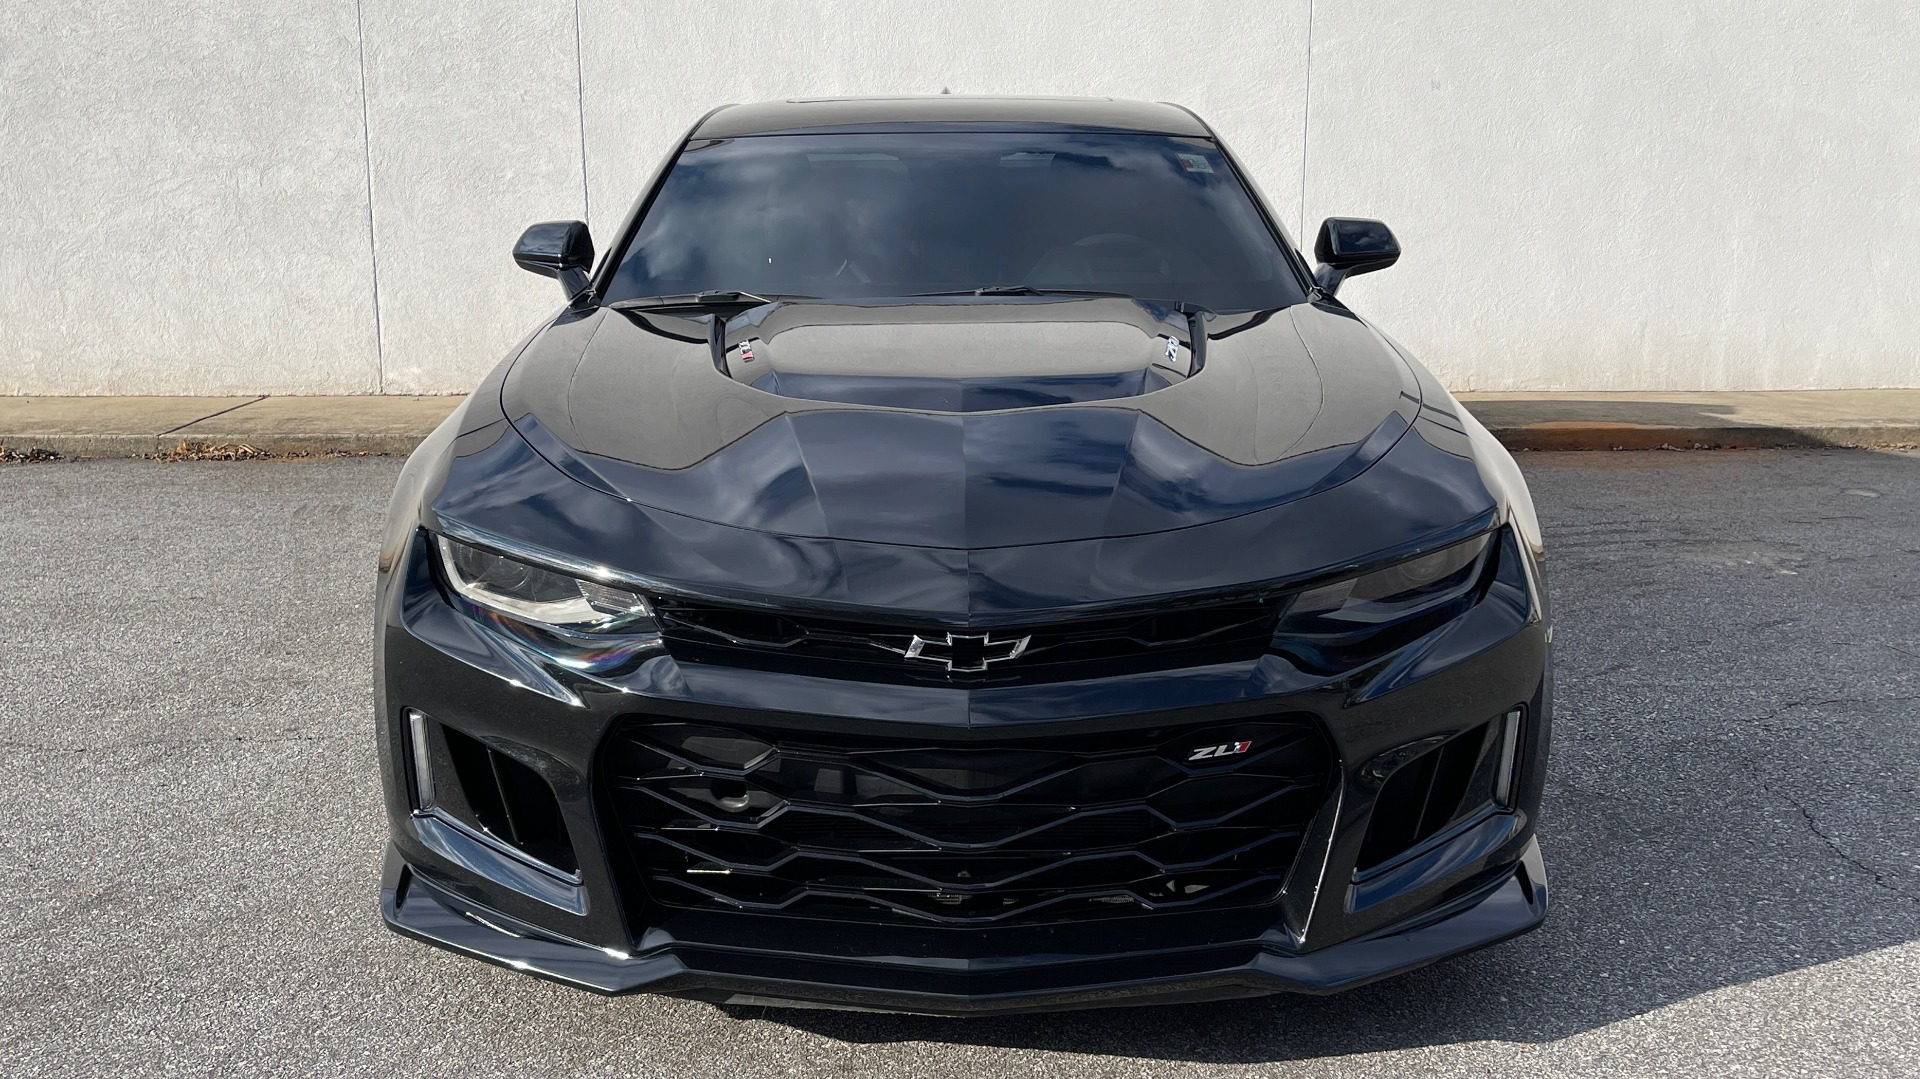 Used 2019 Chevrolet Camaro ZL1 650HP COUPE / 10-SPD AUTO / SUNROOF / BOSE / DATA RECORDER for sale Sold at Formula Imports in Charlotte NC 28227 9